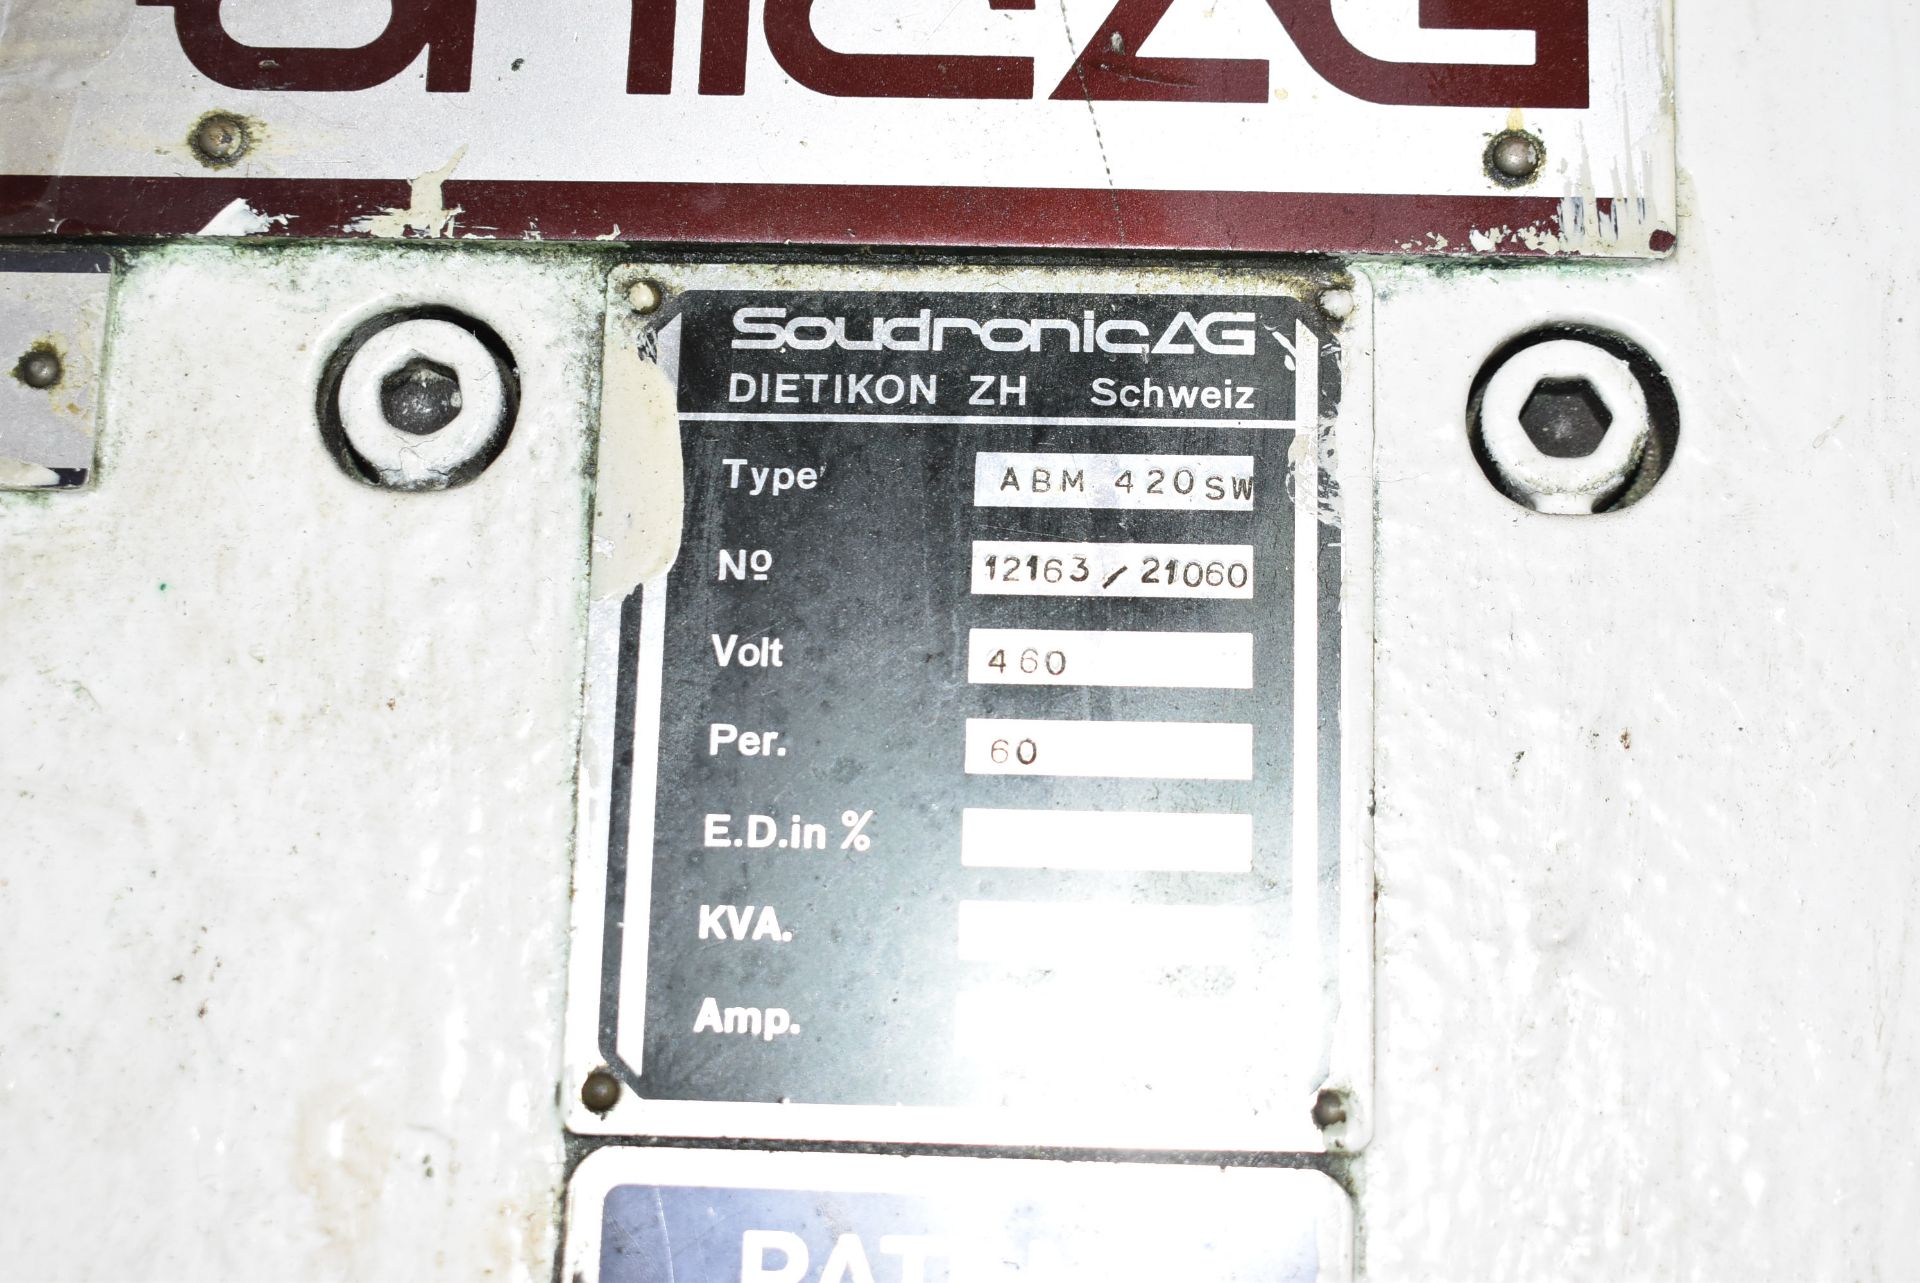 SOUDRONIC ABM 420 SW CAN BODY WELDER, S/N N/A (CI) (PARTS ONLY)(Located at 930 Beaumont Ave, - Image 11 of 13